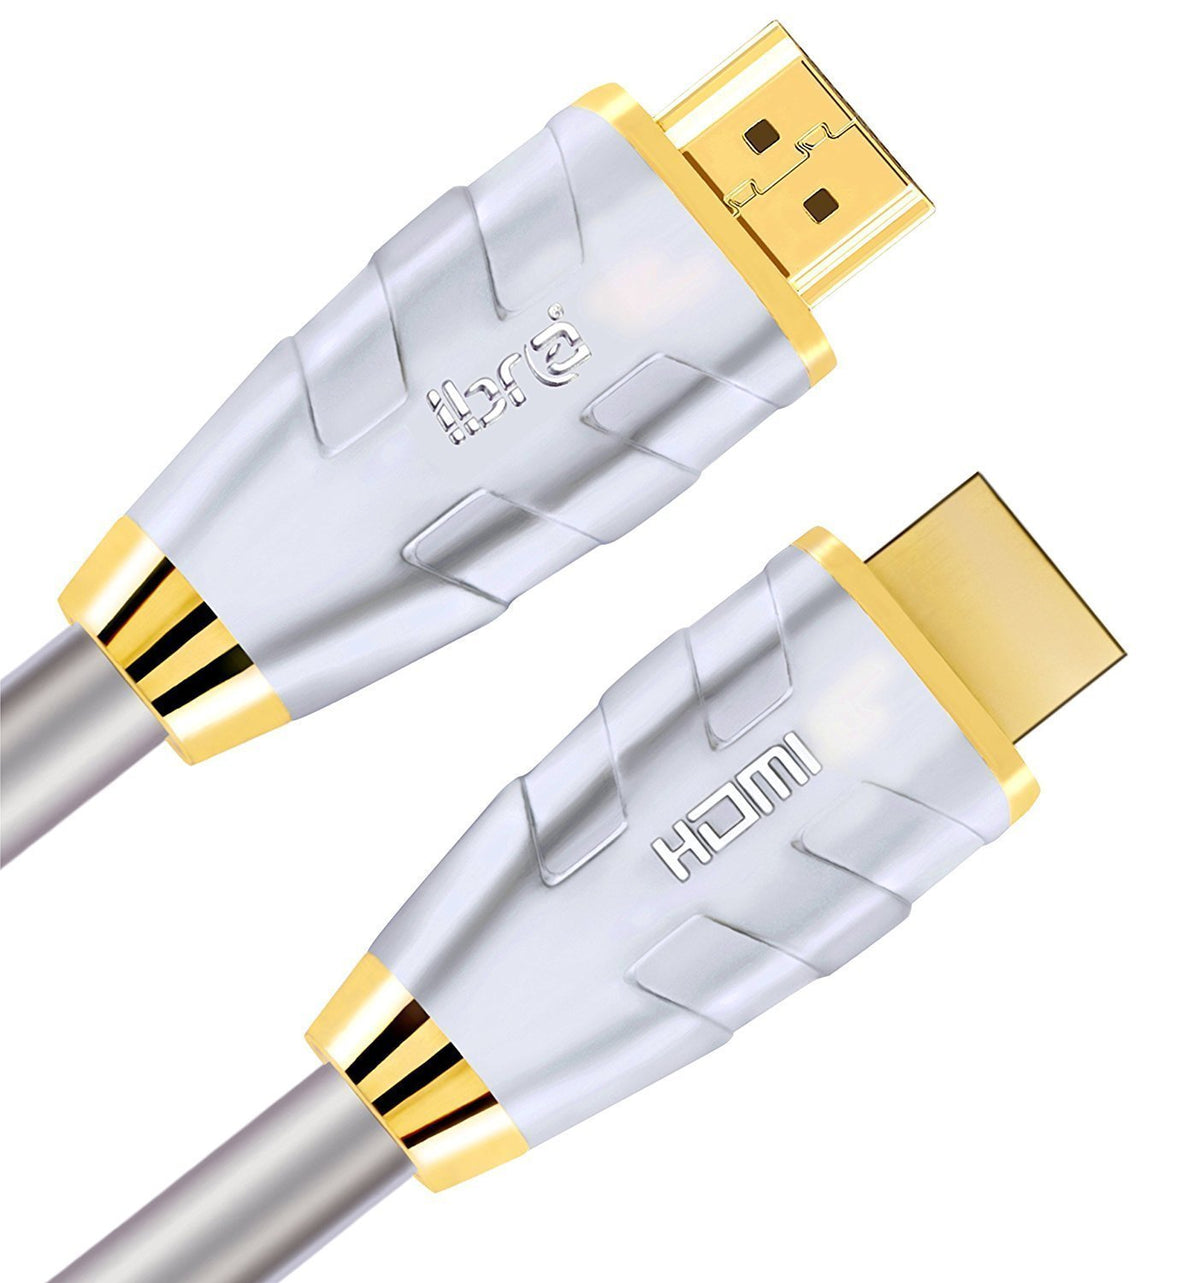 HDMI Cable 4M HDMI 2.0(4K@60Hz)-18Gbps+ -28AWG Advanced Braided Cord-Gold Plated Connectors-Ethernet,Audio Return Video 4K2160p HD1080p3D XboxPlayStation PS3 PS4 AppleTV-IBRA Advance(Updated Version)